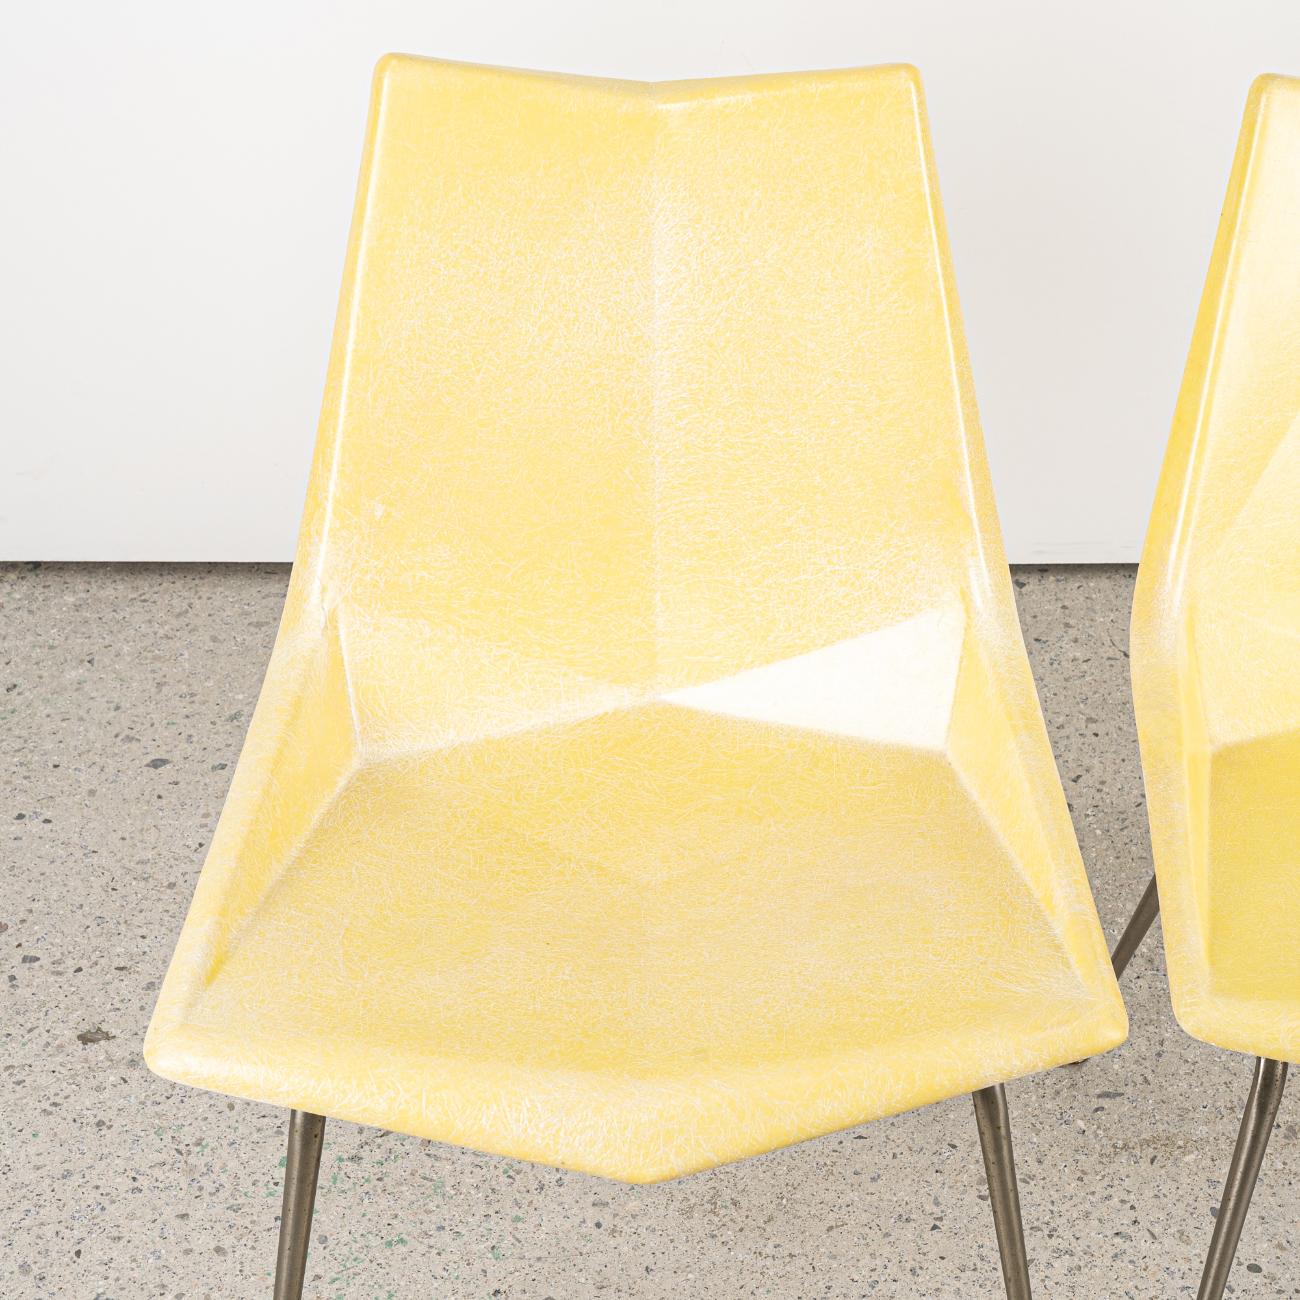 A 1950s Paul McCobb Origami chair for St. John. 
The fiberglass seat is molded at angles, reminiscent of the Japanese origami technique. 
Lemon Yellow fibreglass seat is in good vintage condition.
A faded but partially legible label is present